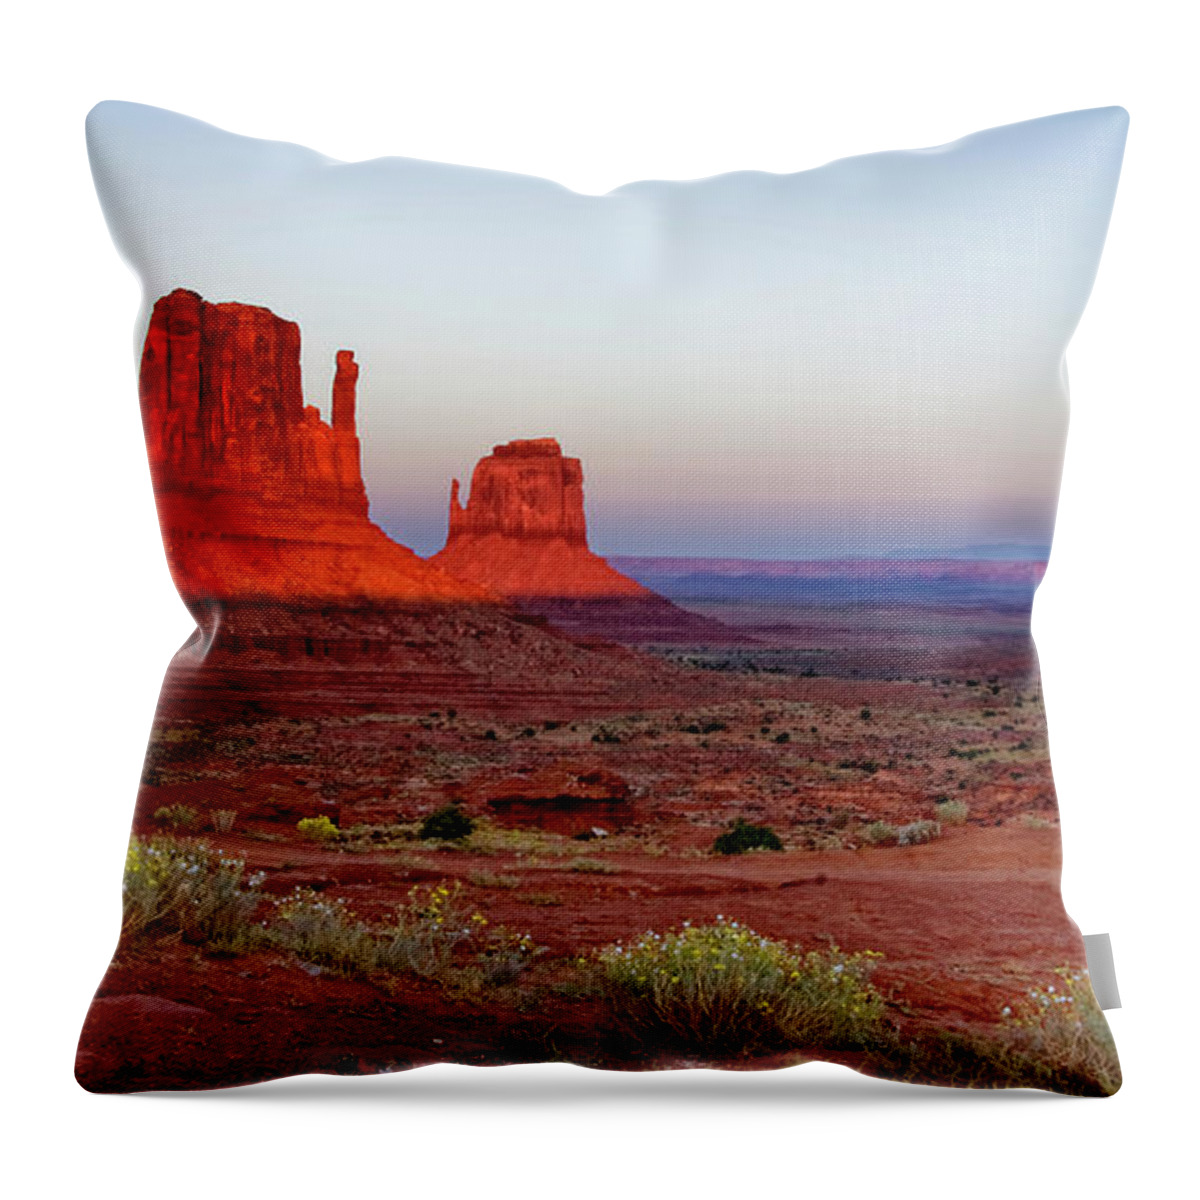 Tranquility Throw Pillow featuring the photograph Mittens And Merrick Butte by Patti Sullivan Schmidt